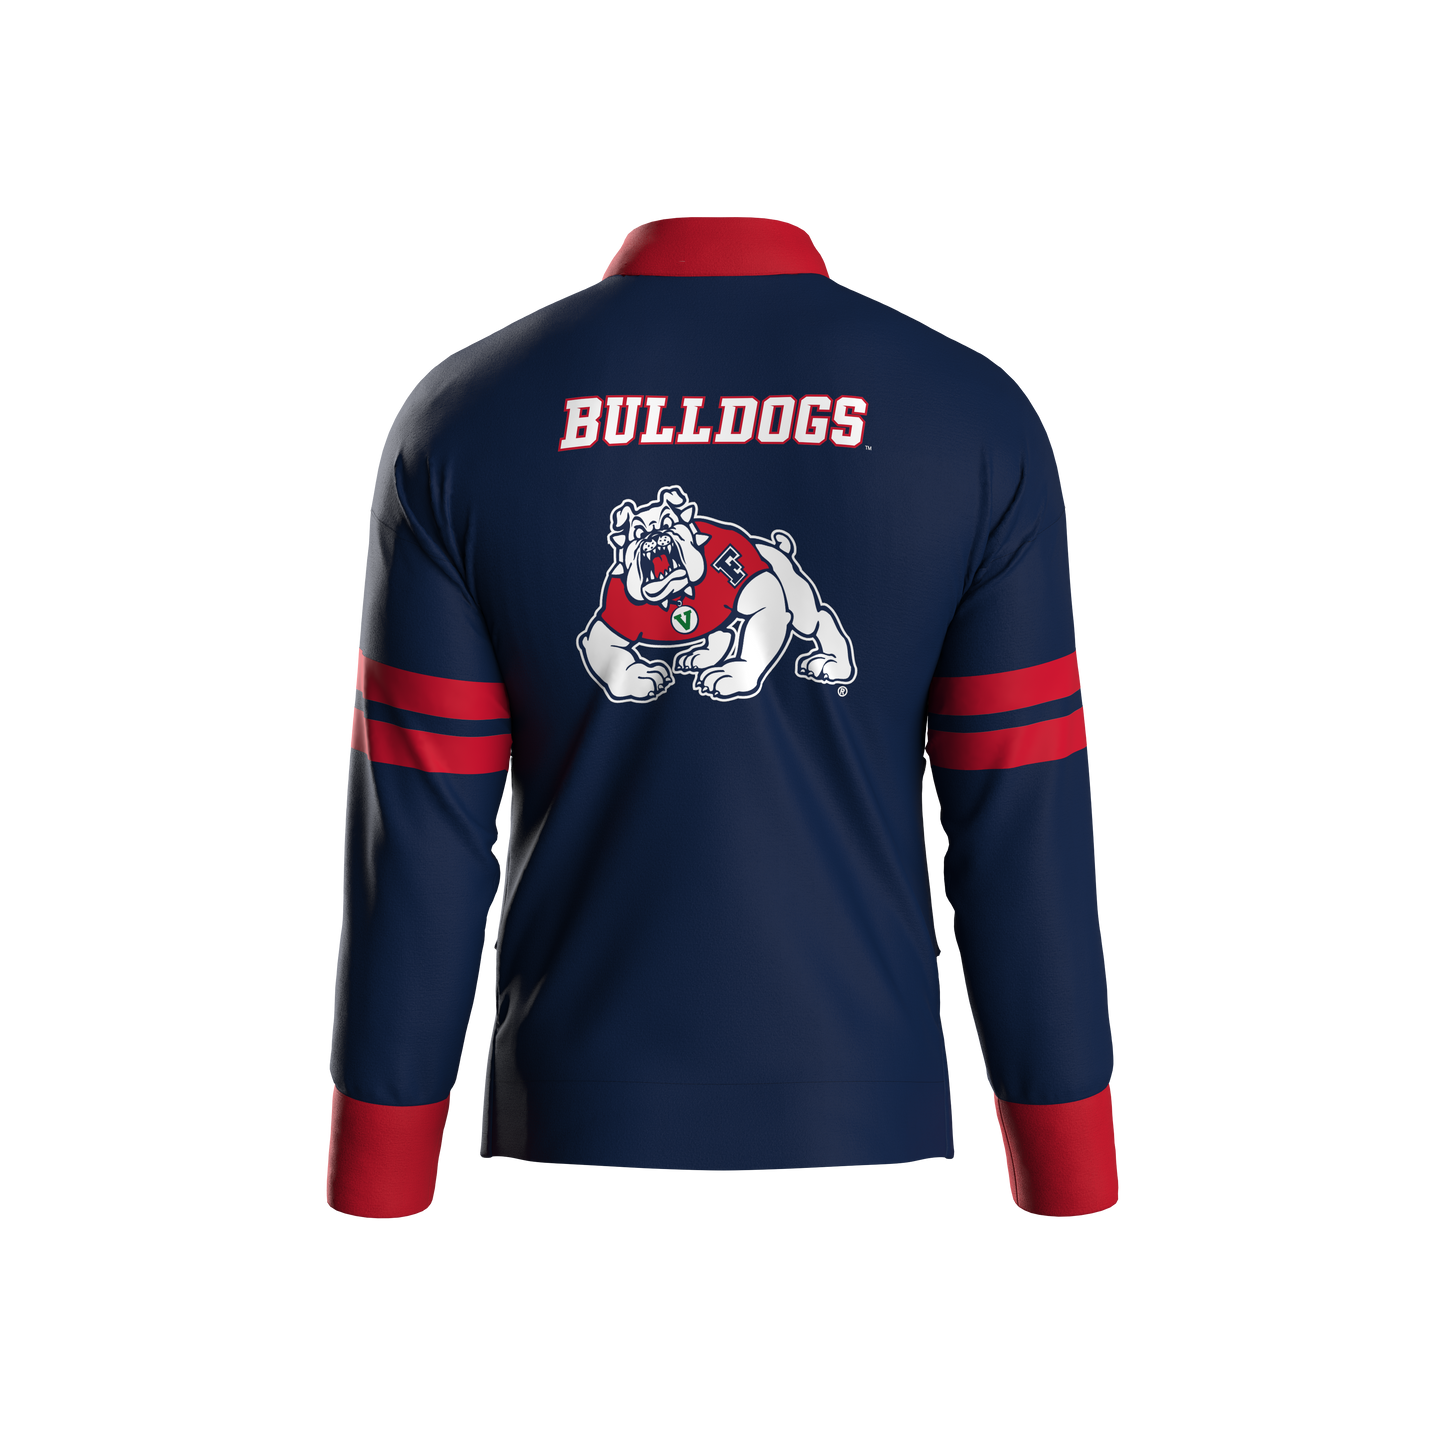 Fresno State University Home Zip-Up (adult)